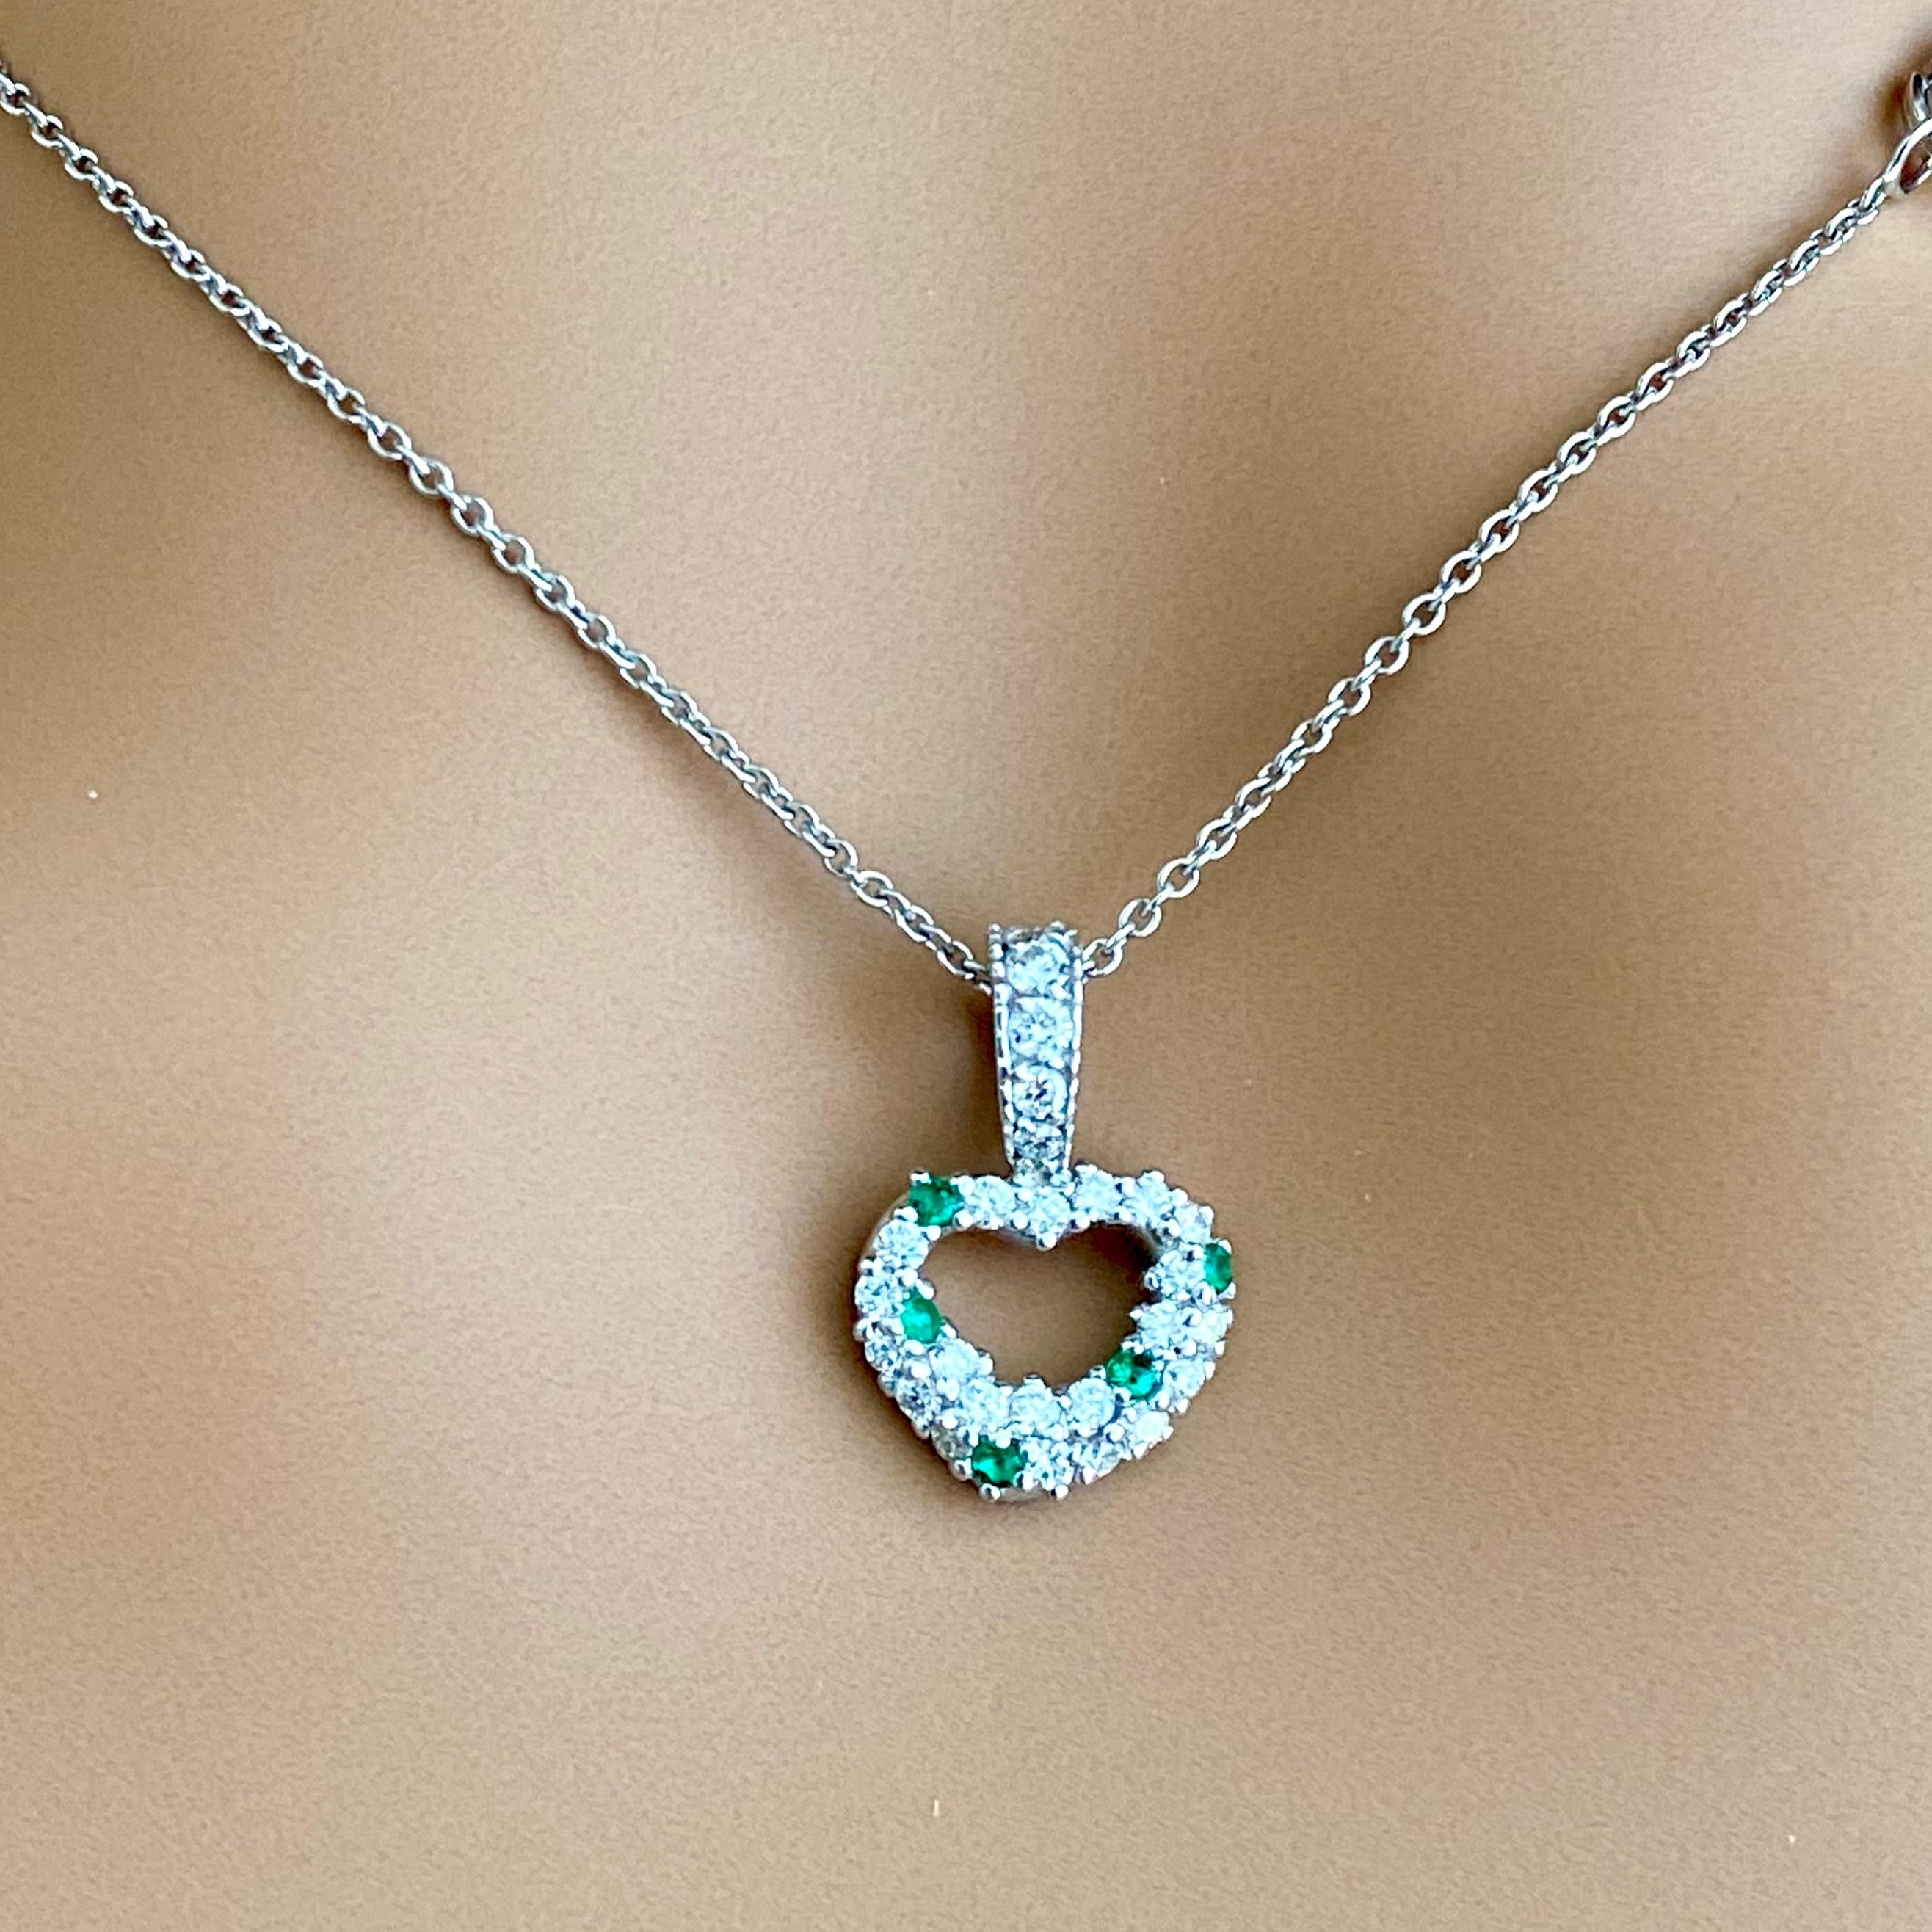 Round Cut Diamond and Emerald 1.20 Carat Open Heart 16.75 Inch White Gold Necklace Pendant